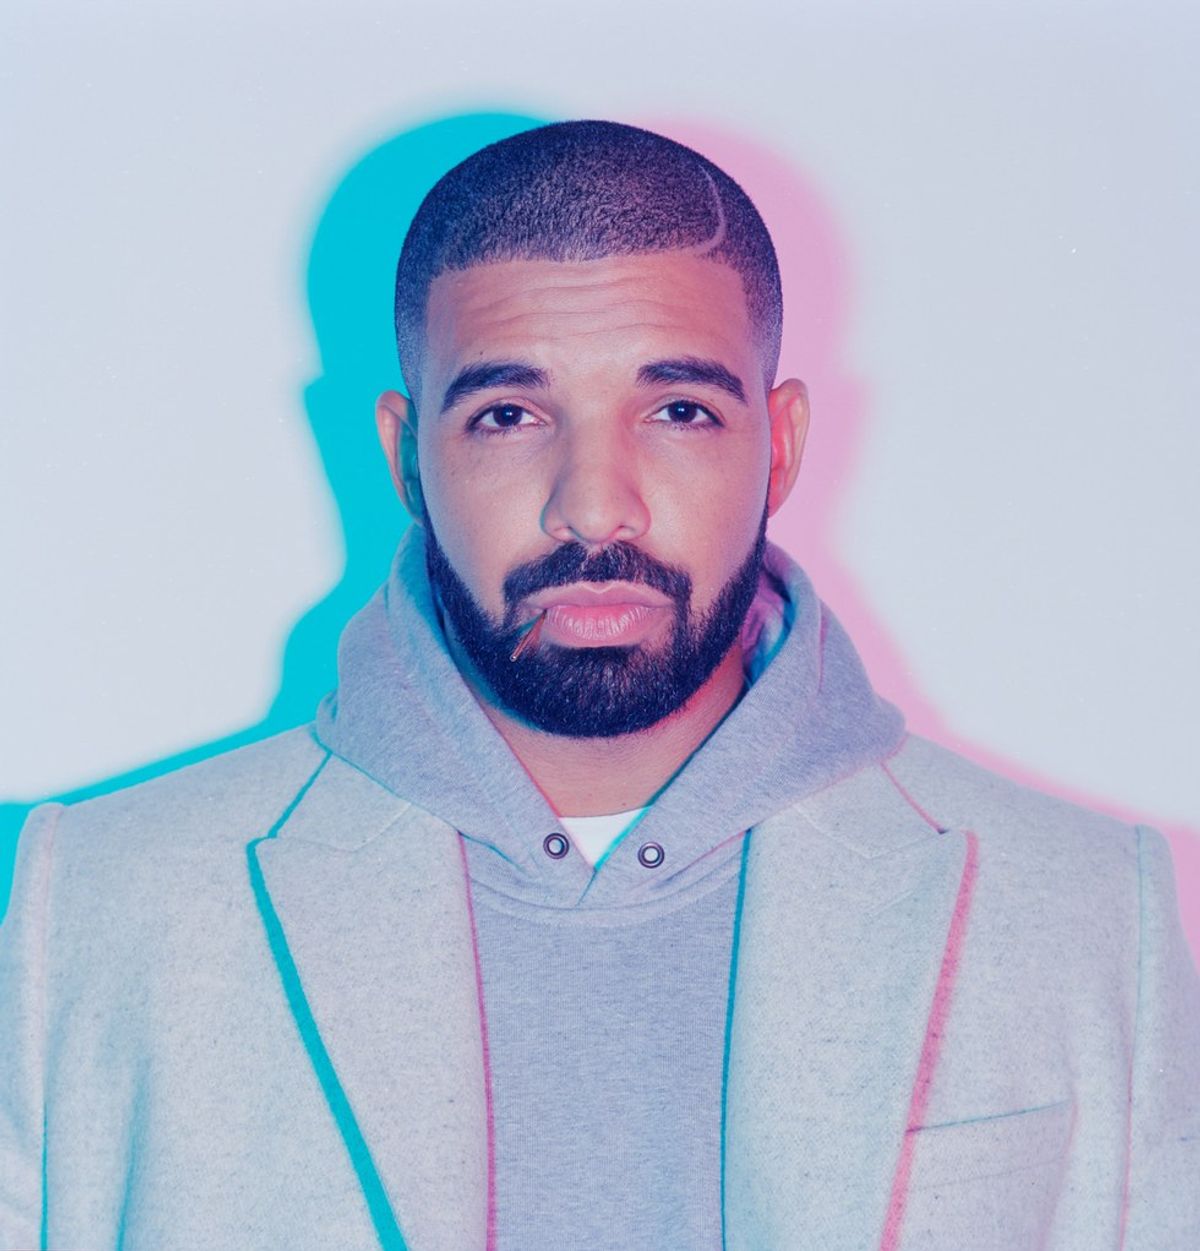 30 Drake Lyrics For When You're In Your Feelings